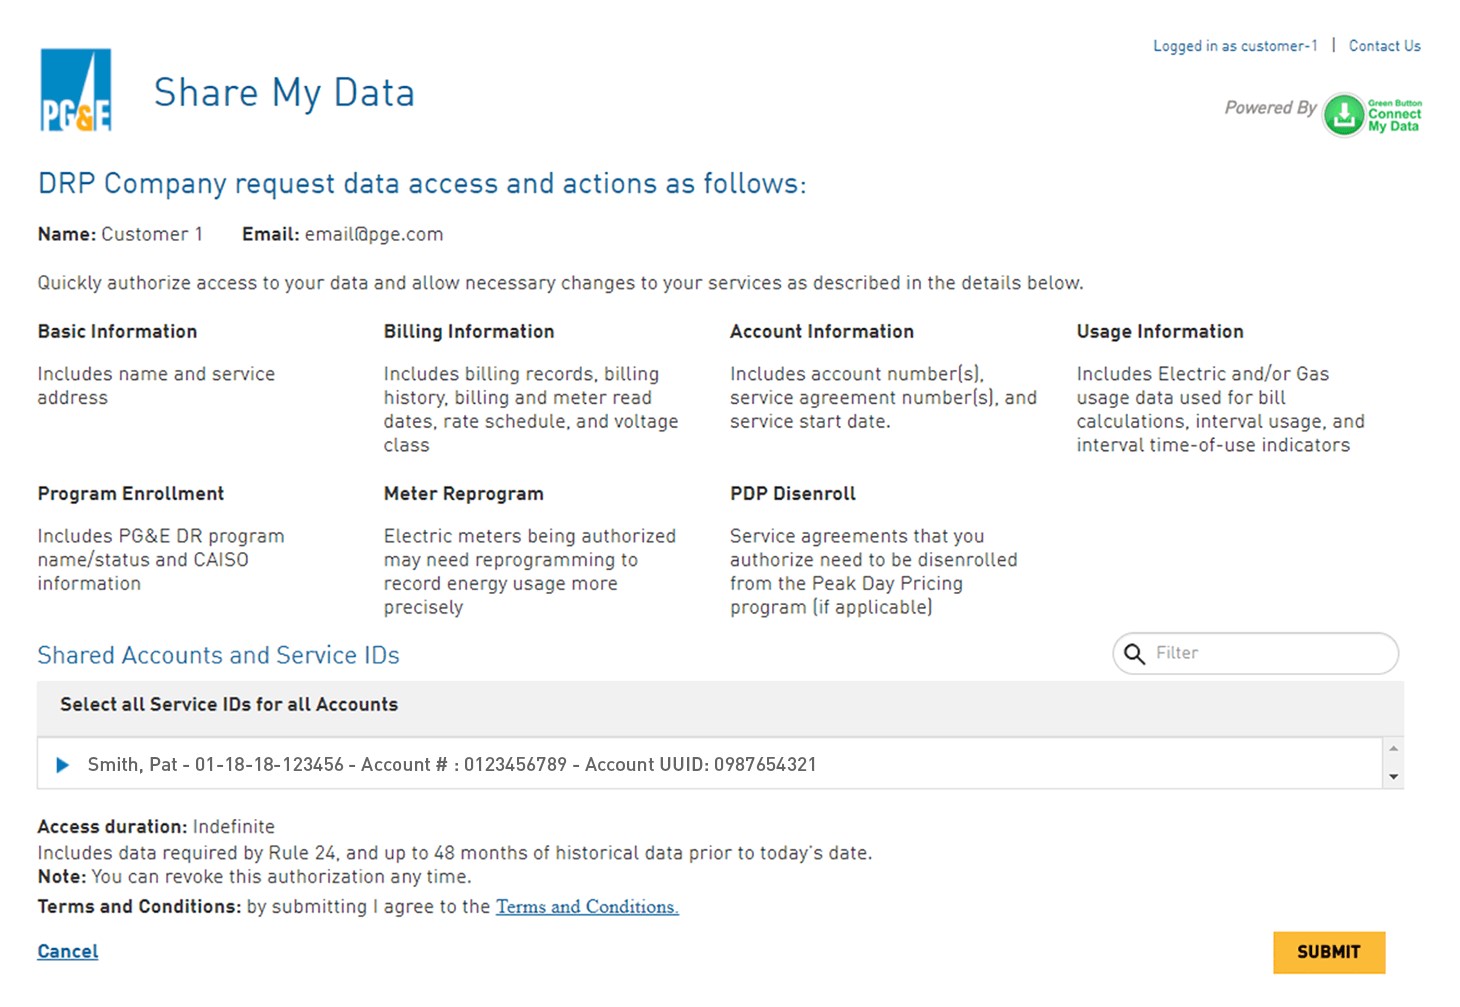 Sign in to Share My Data online